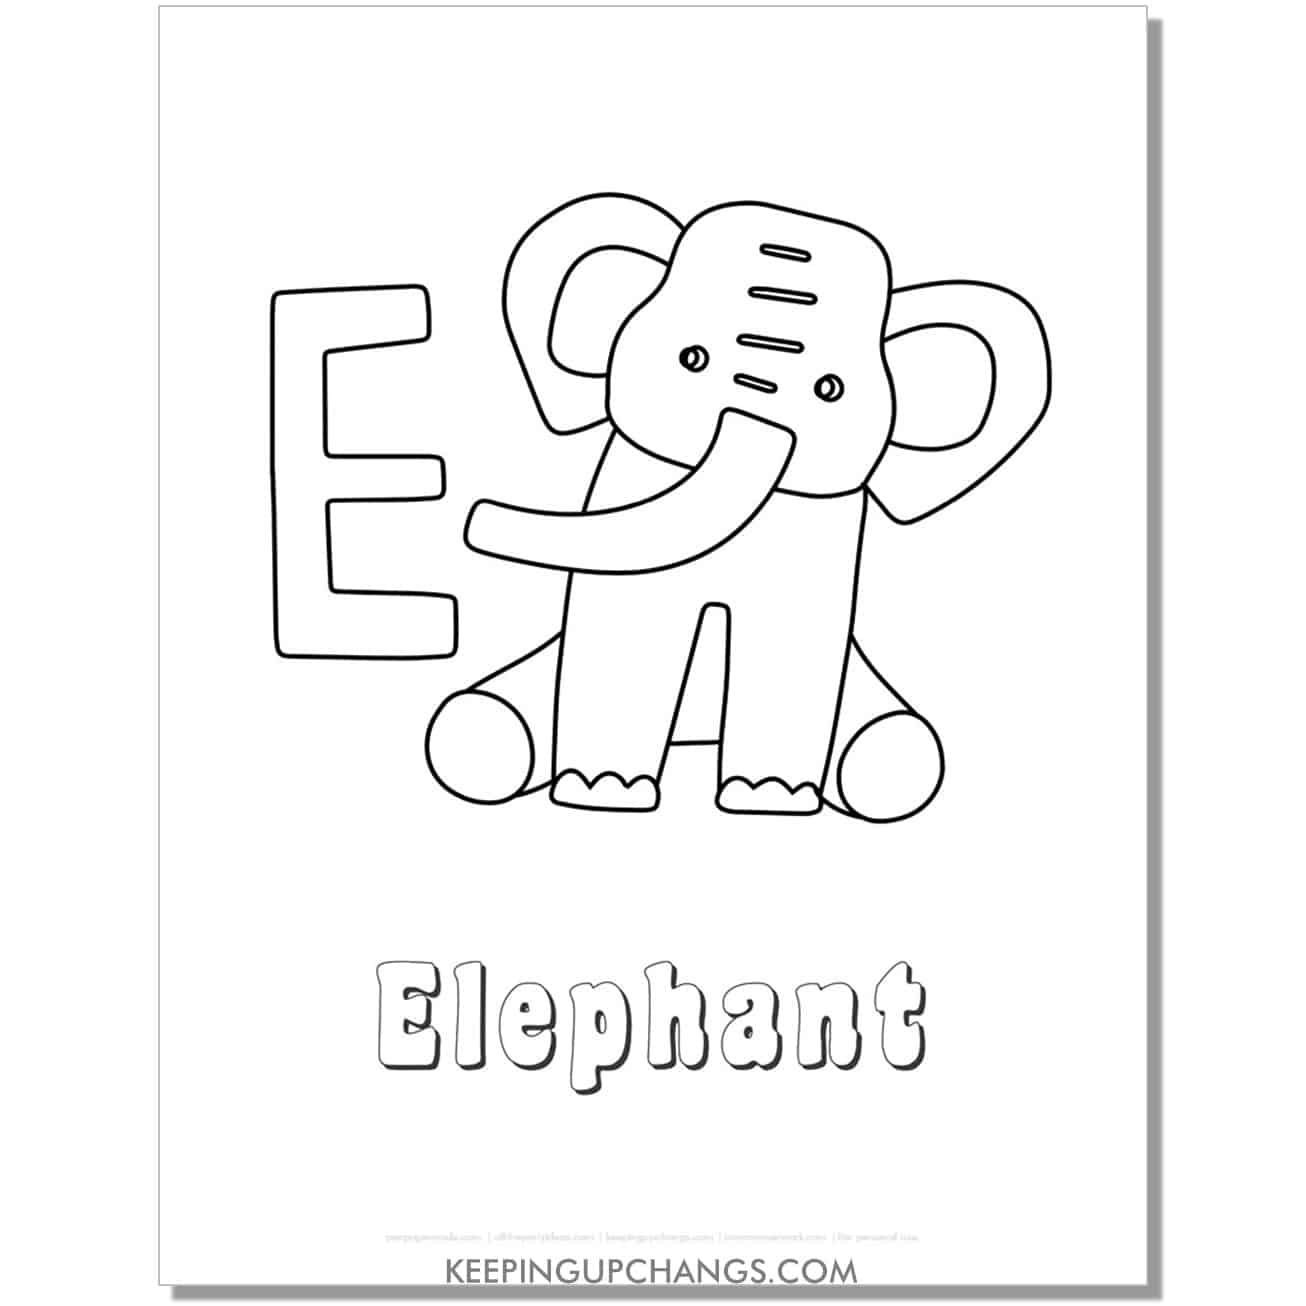 fun abc e coloring page with elephant hand drawing.